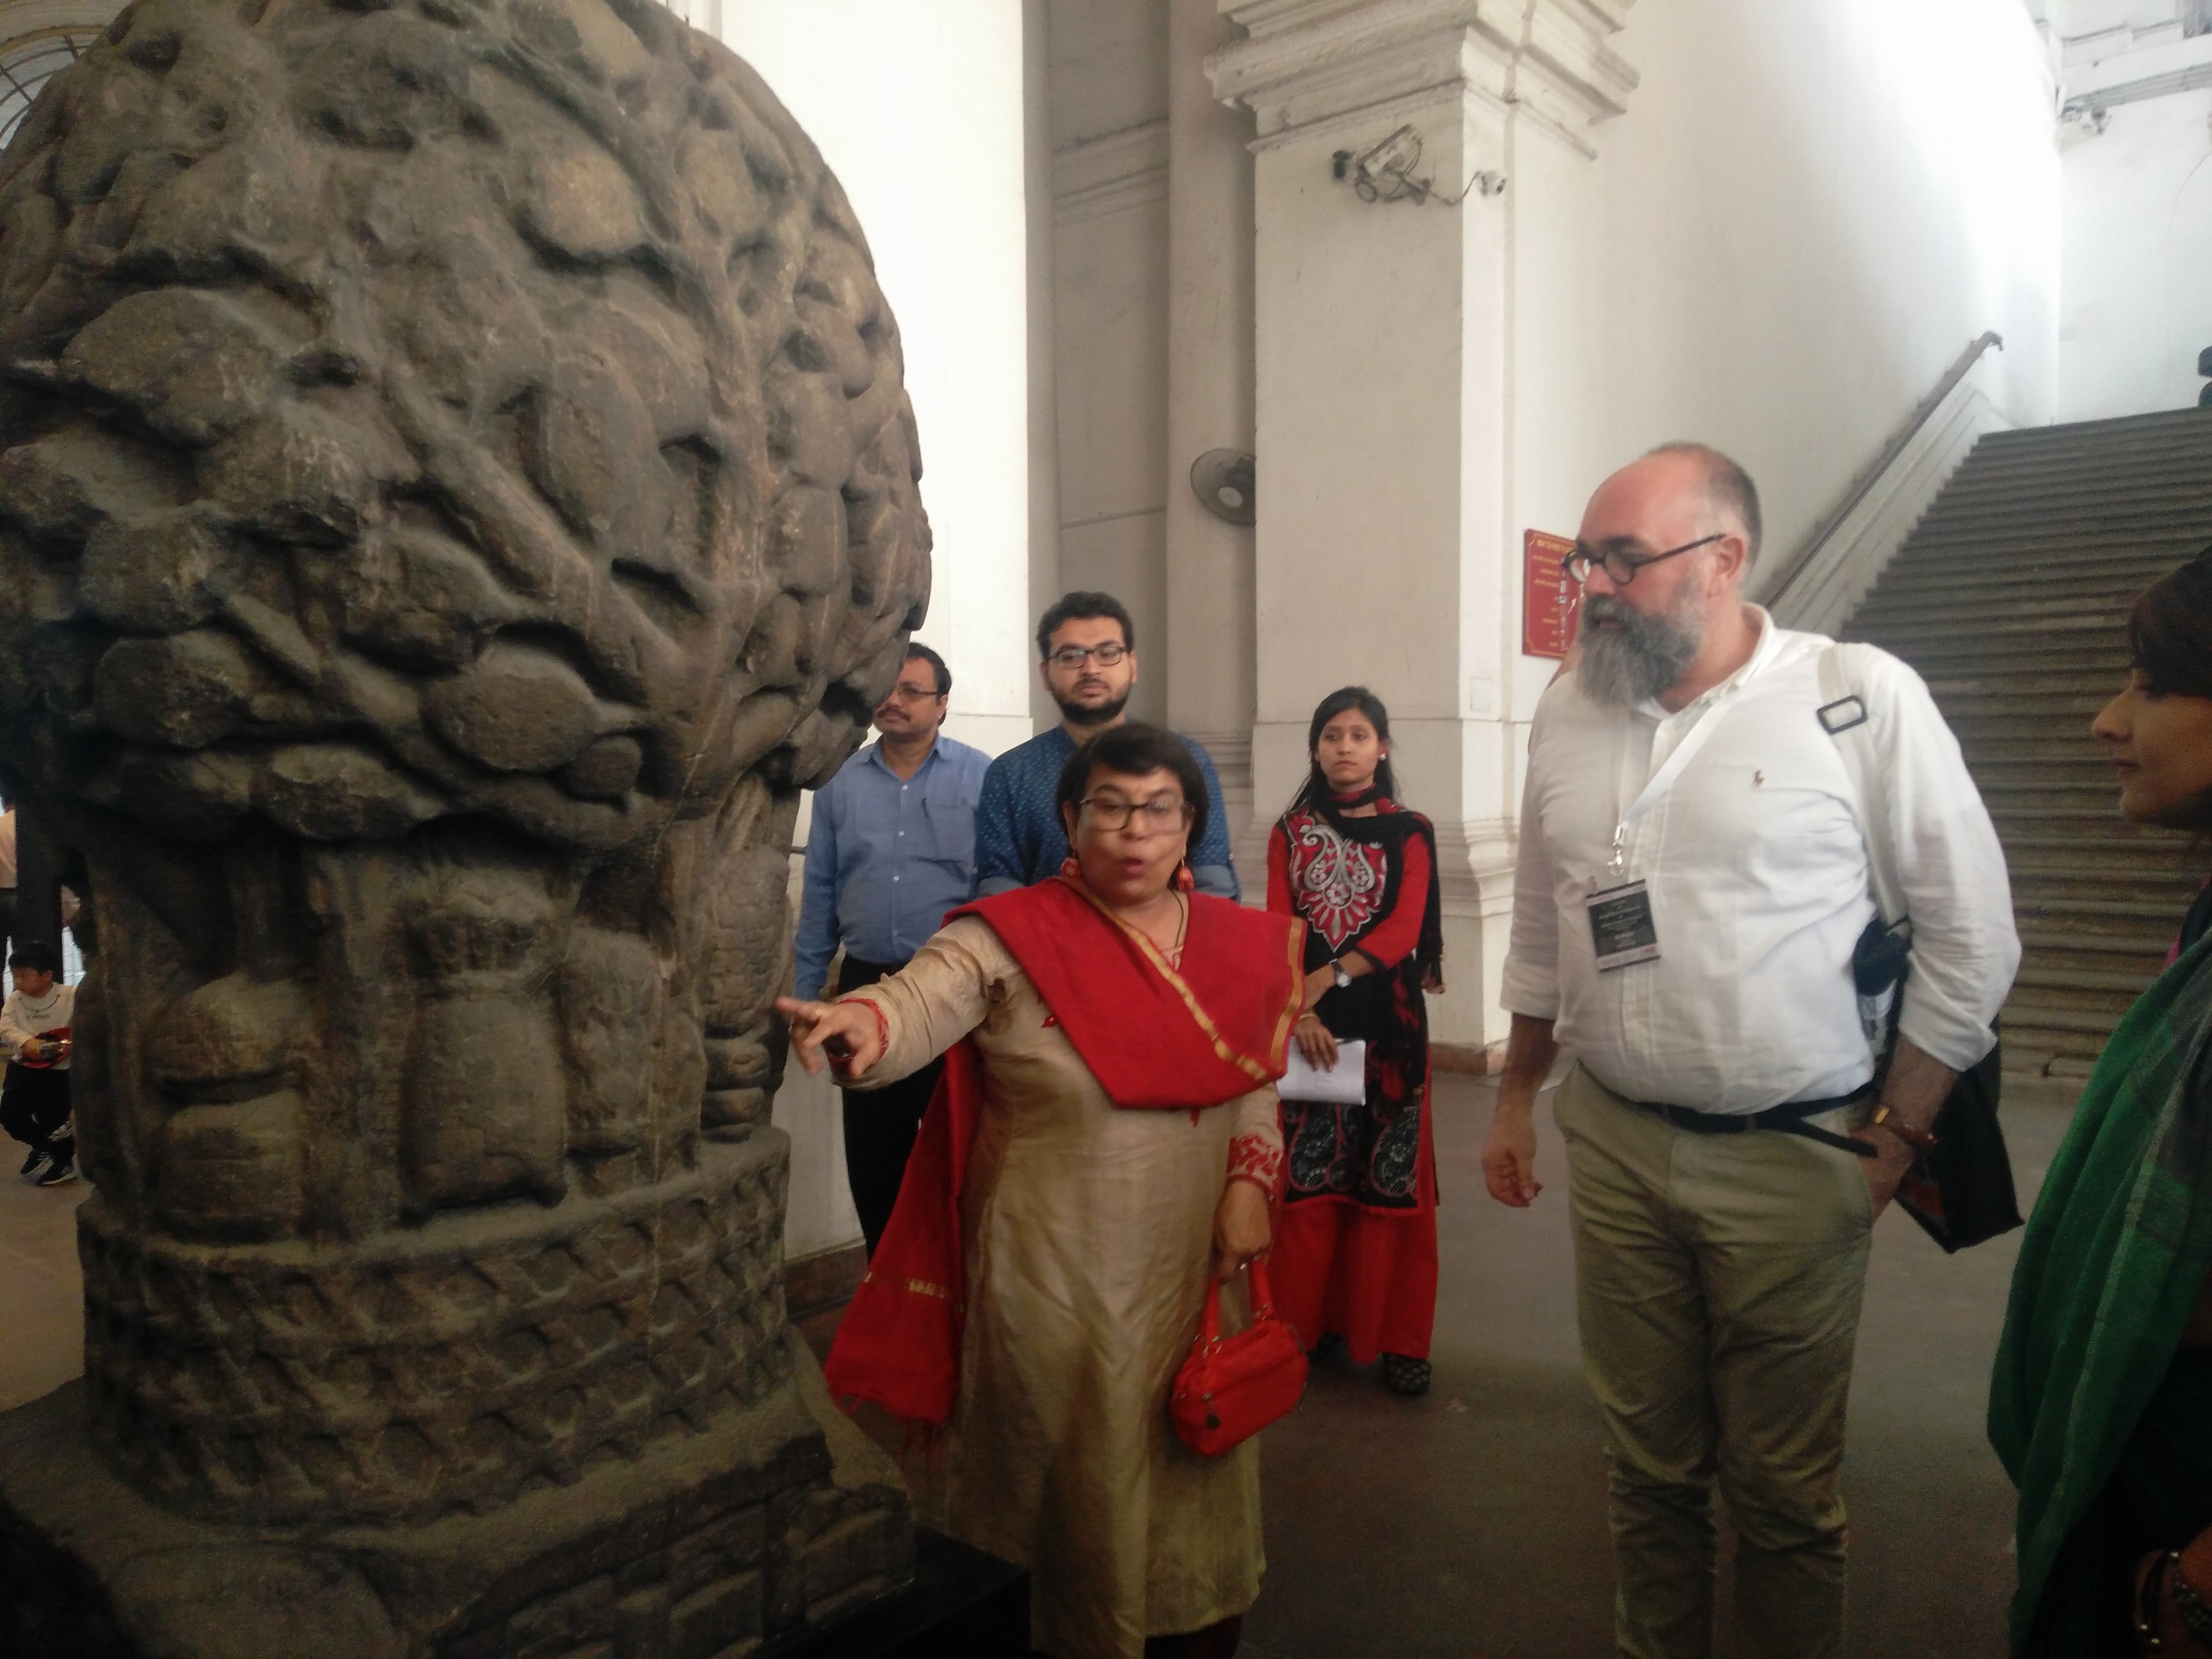 Senior curator at Indian Museum Kolkata during a curated walk through the museum for the conference participants. Pic Credit: Koumudi Malladi